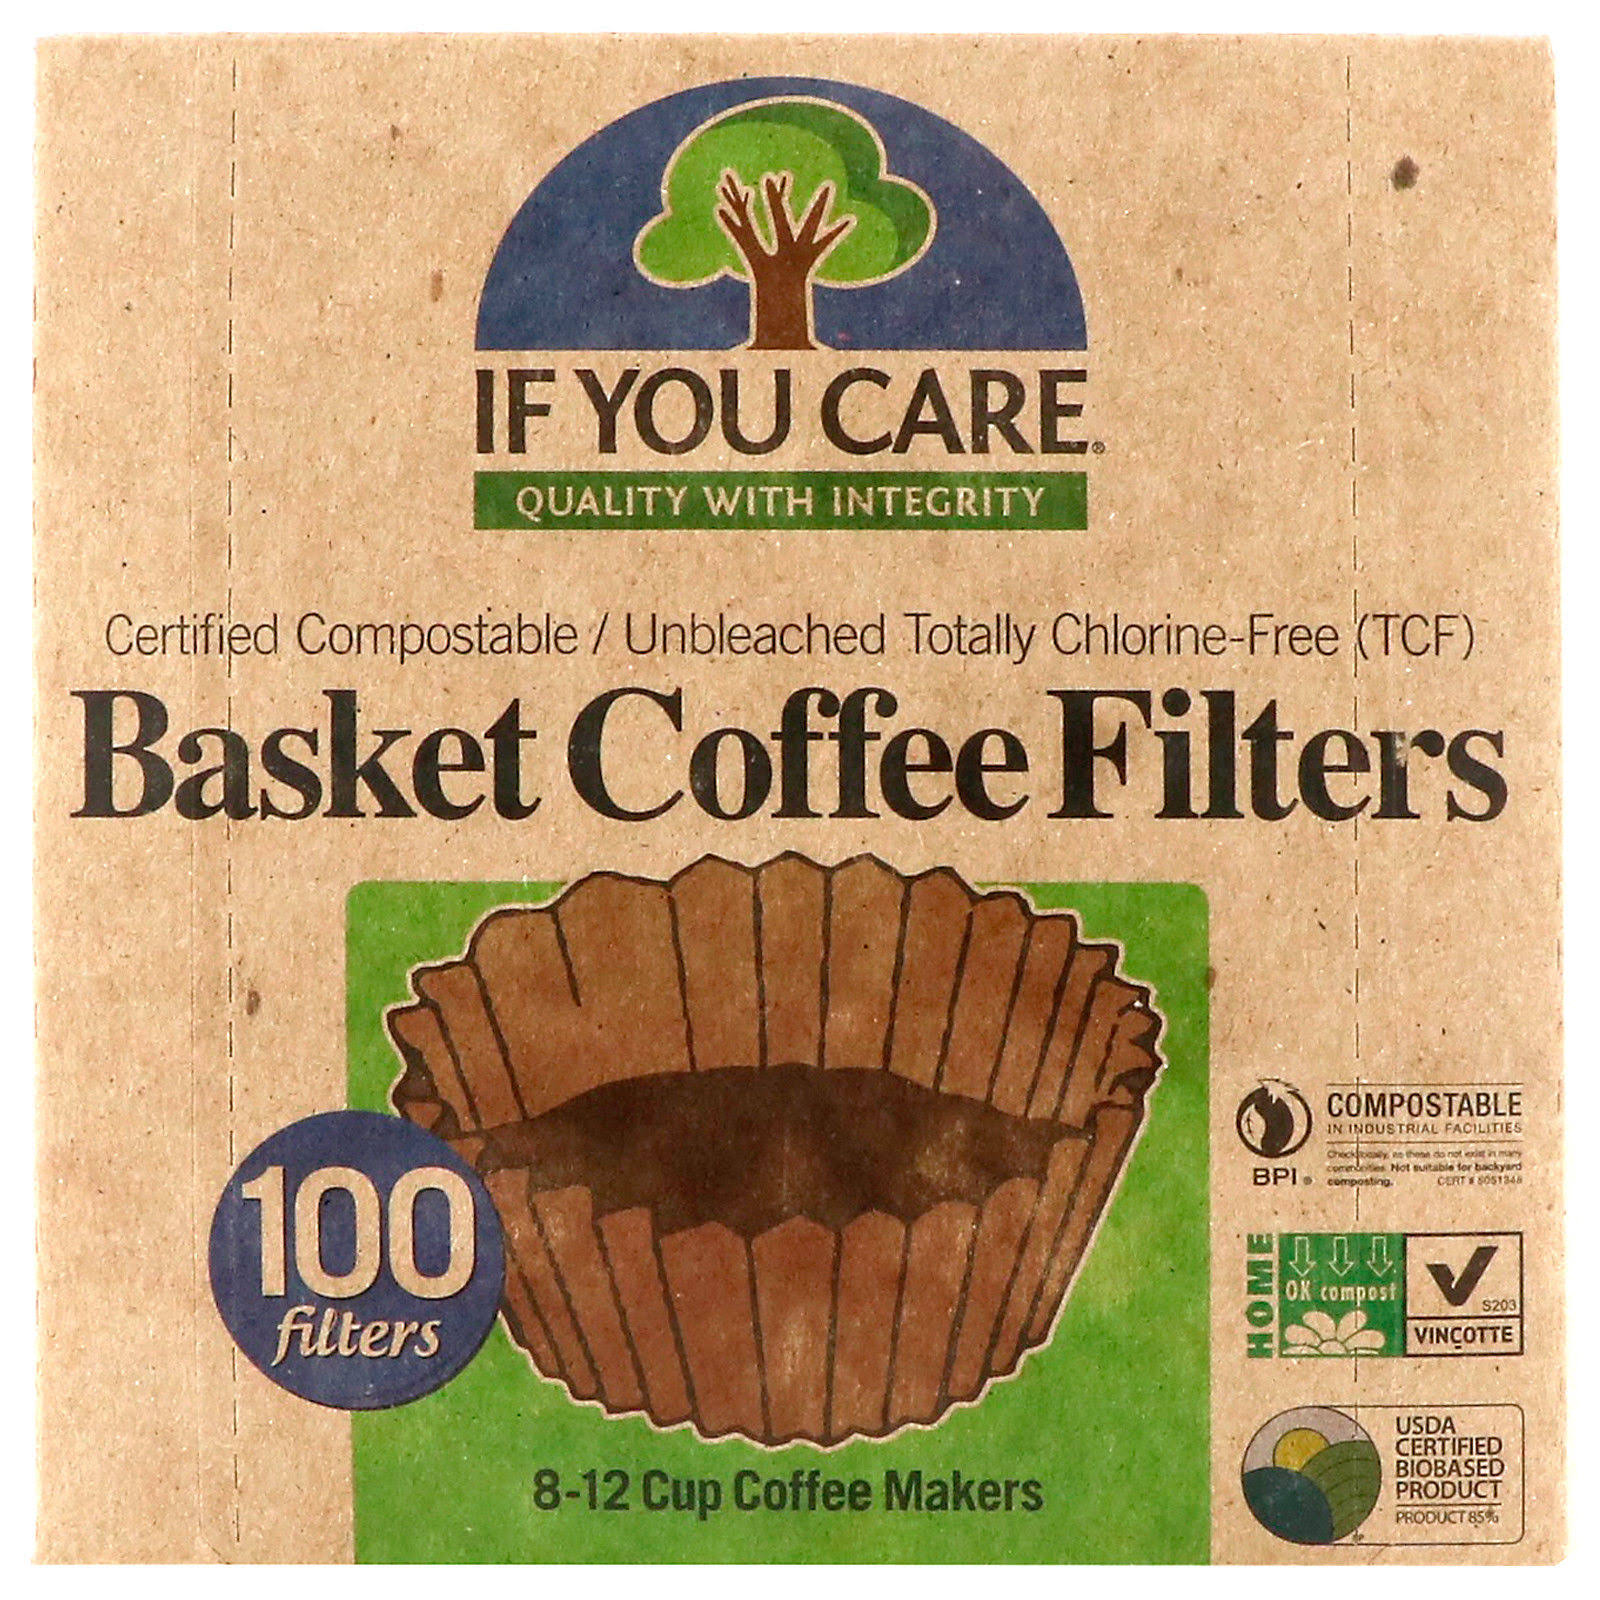 If You Care Basket Coffee Filters - 100 Filters